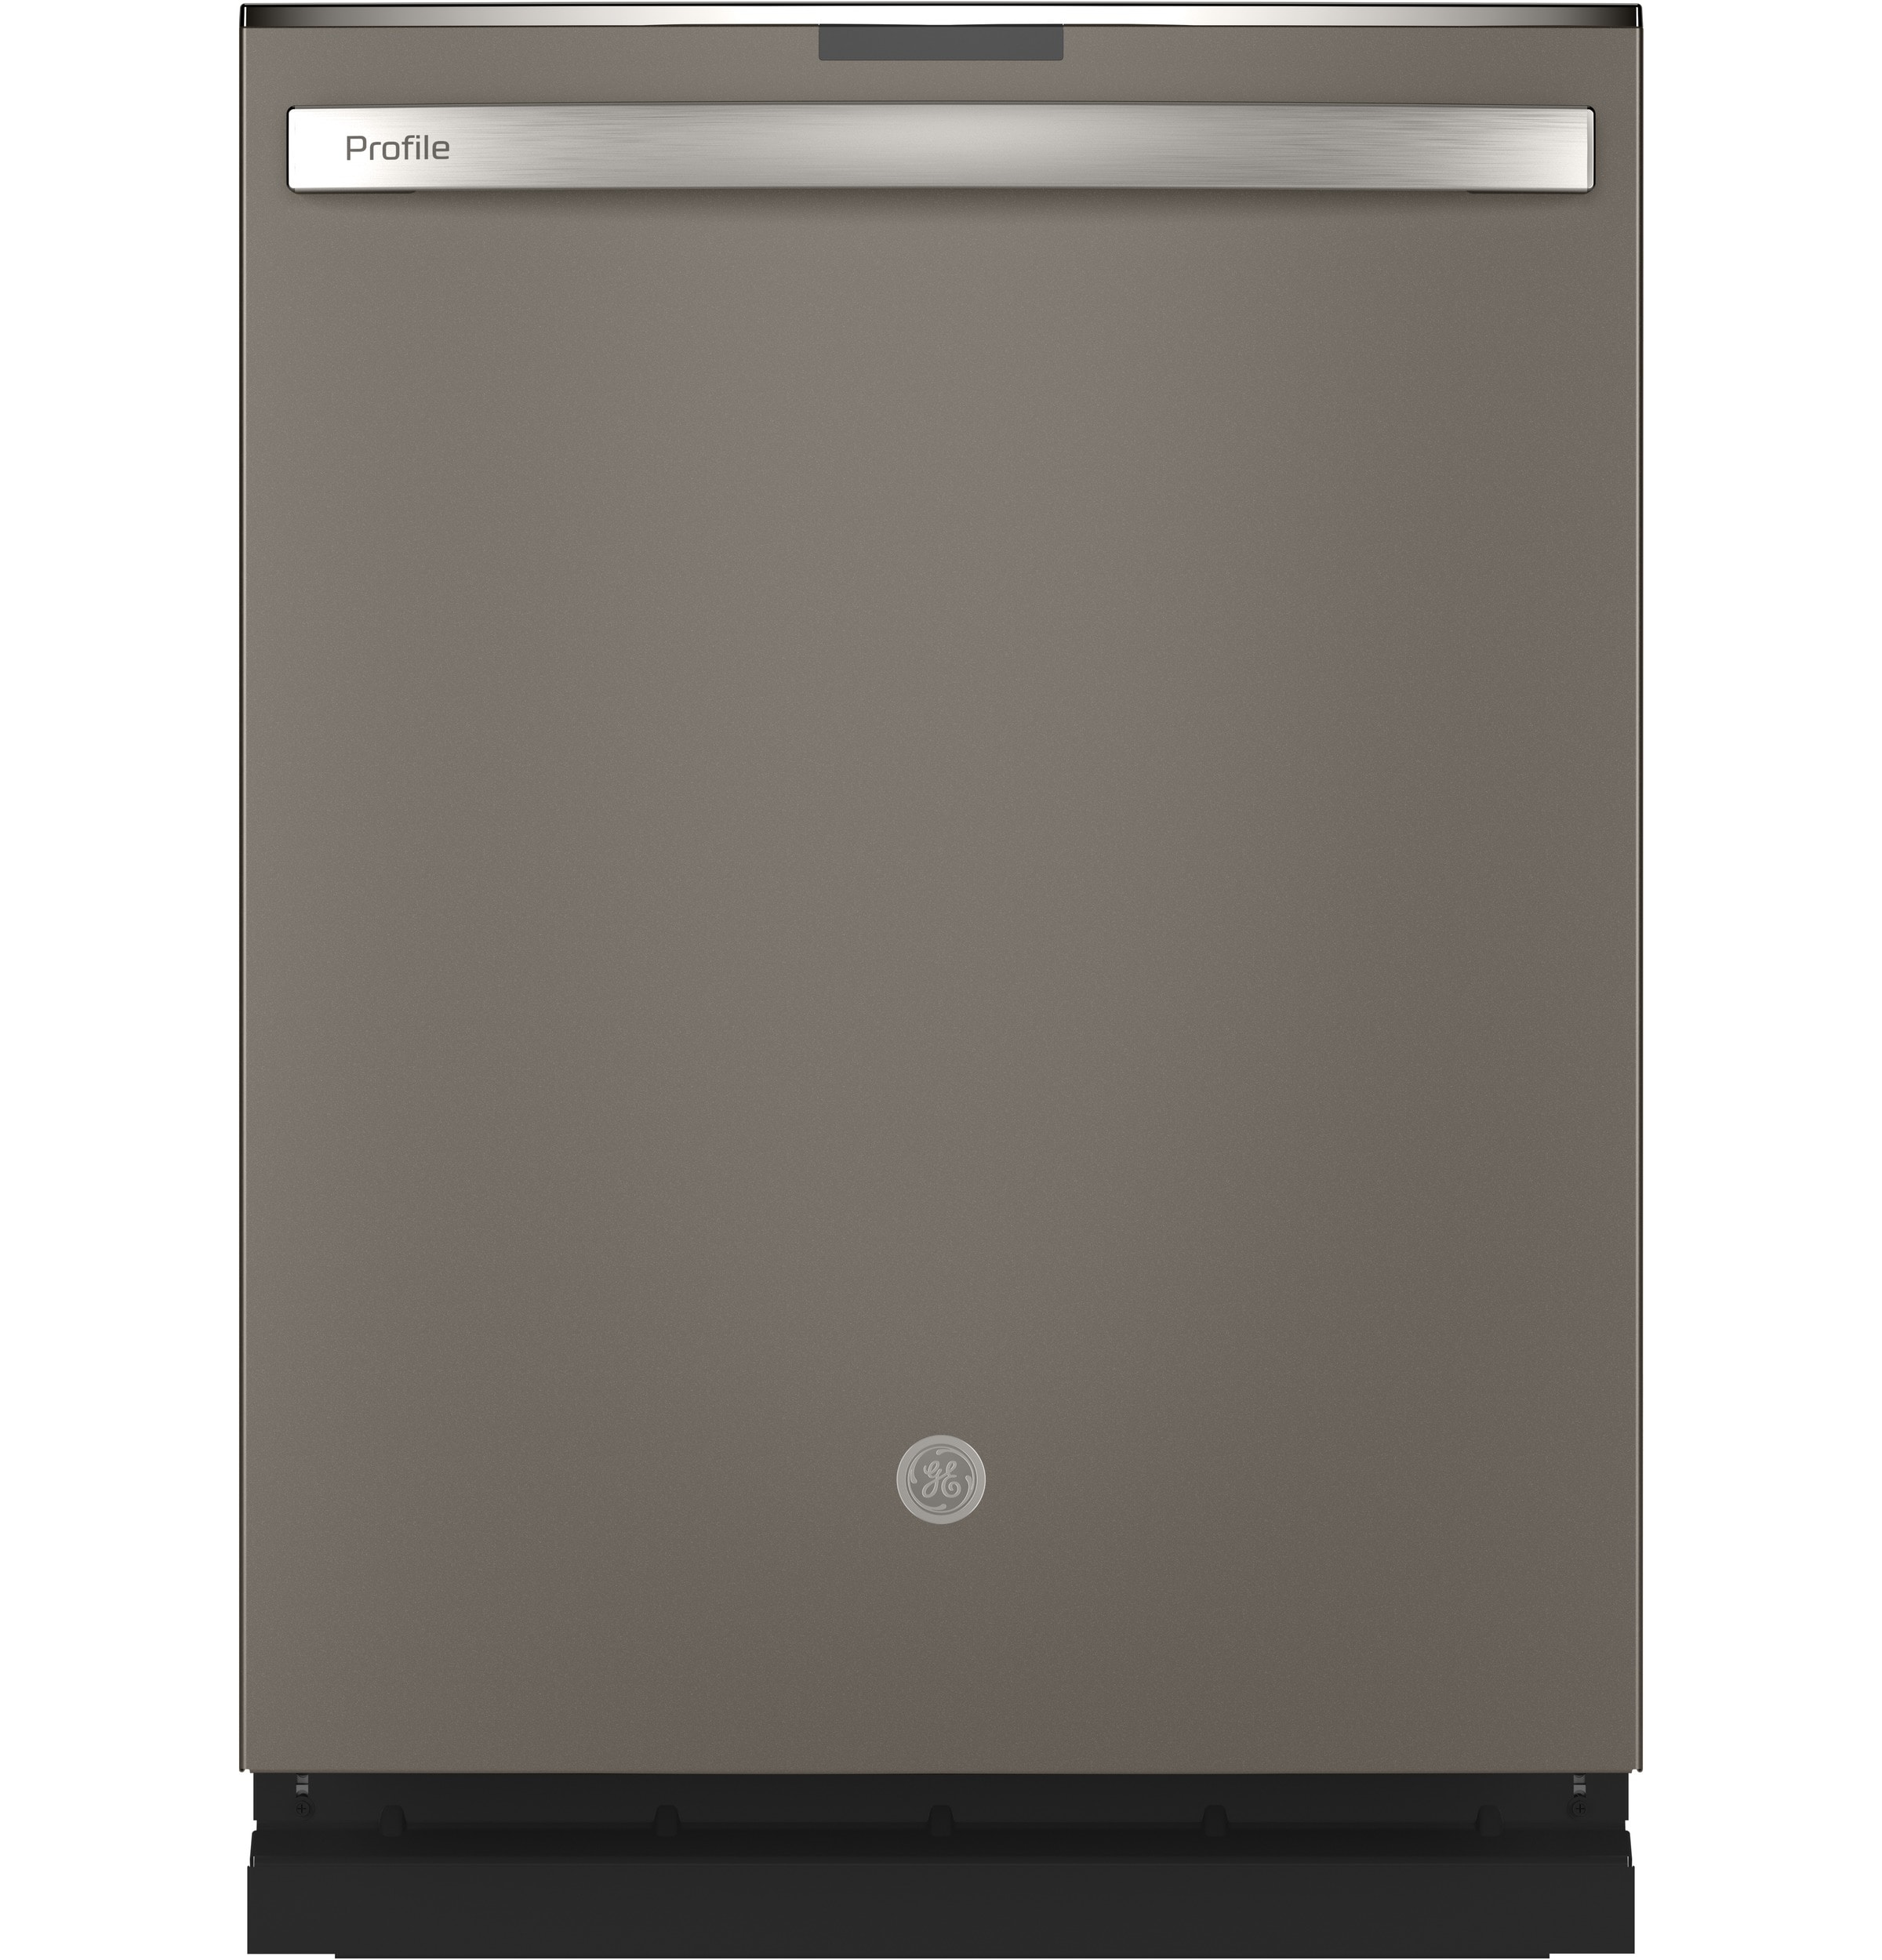 GE Profile Dry Boost Top Control 24-in Built-In Dishwasher (Slate